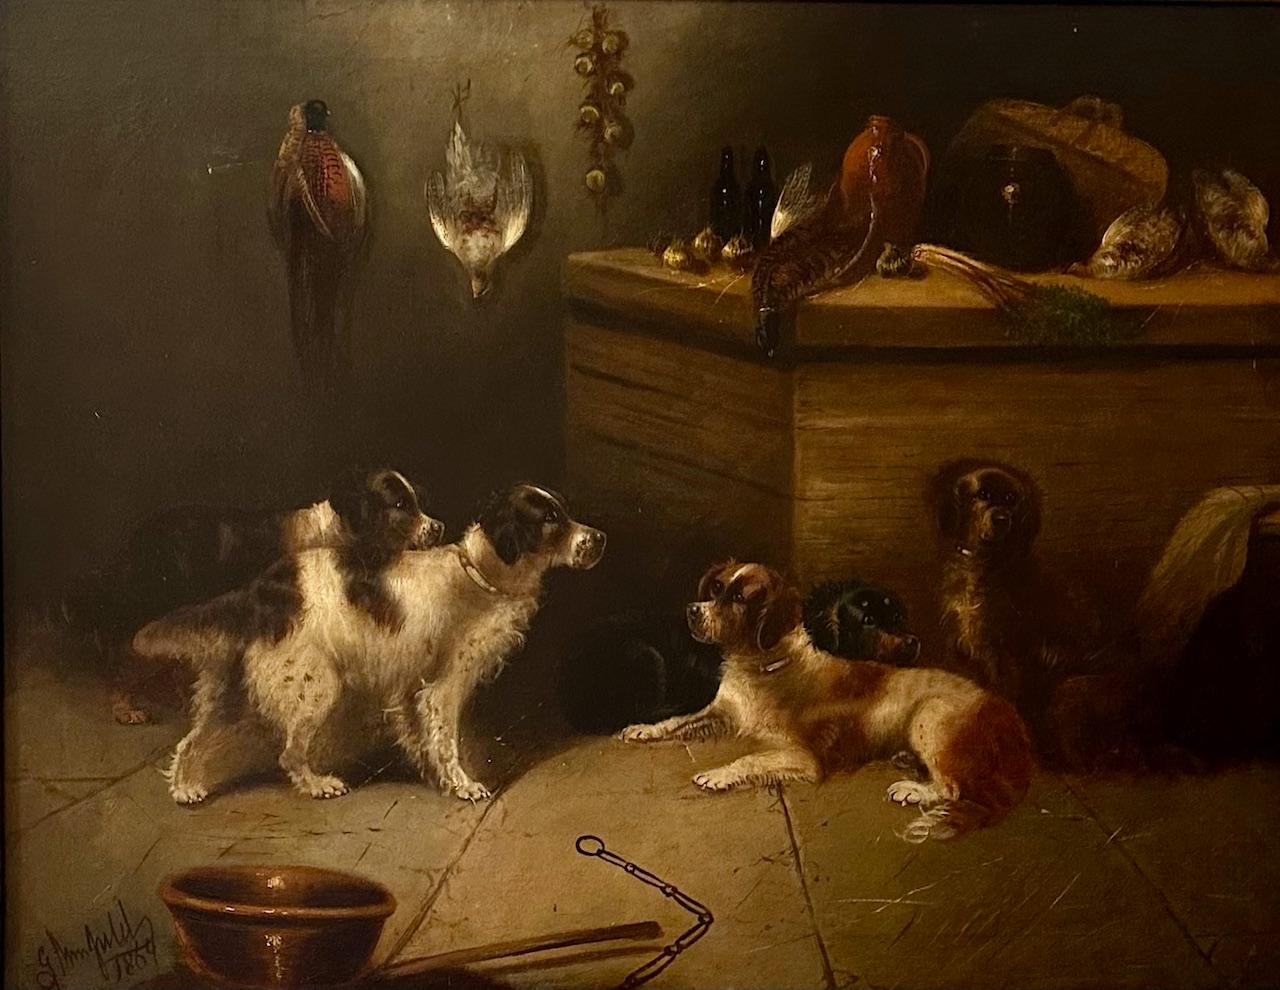 Large 19th Century English Oil Painting -Five Hunting Dogs- signed E. Armfield.

Large, signed painting in oil on canvas. This Armfield features five hunting dogs in a rustic interior. The painting is executed in the highest artistic perfection with